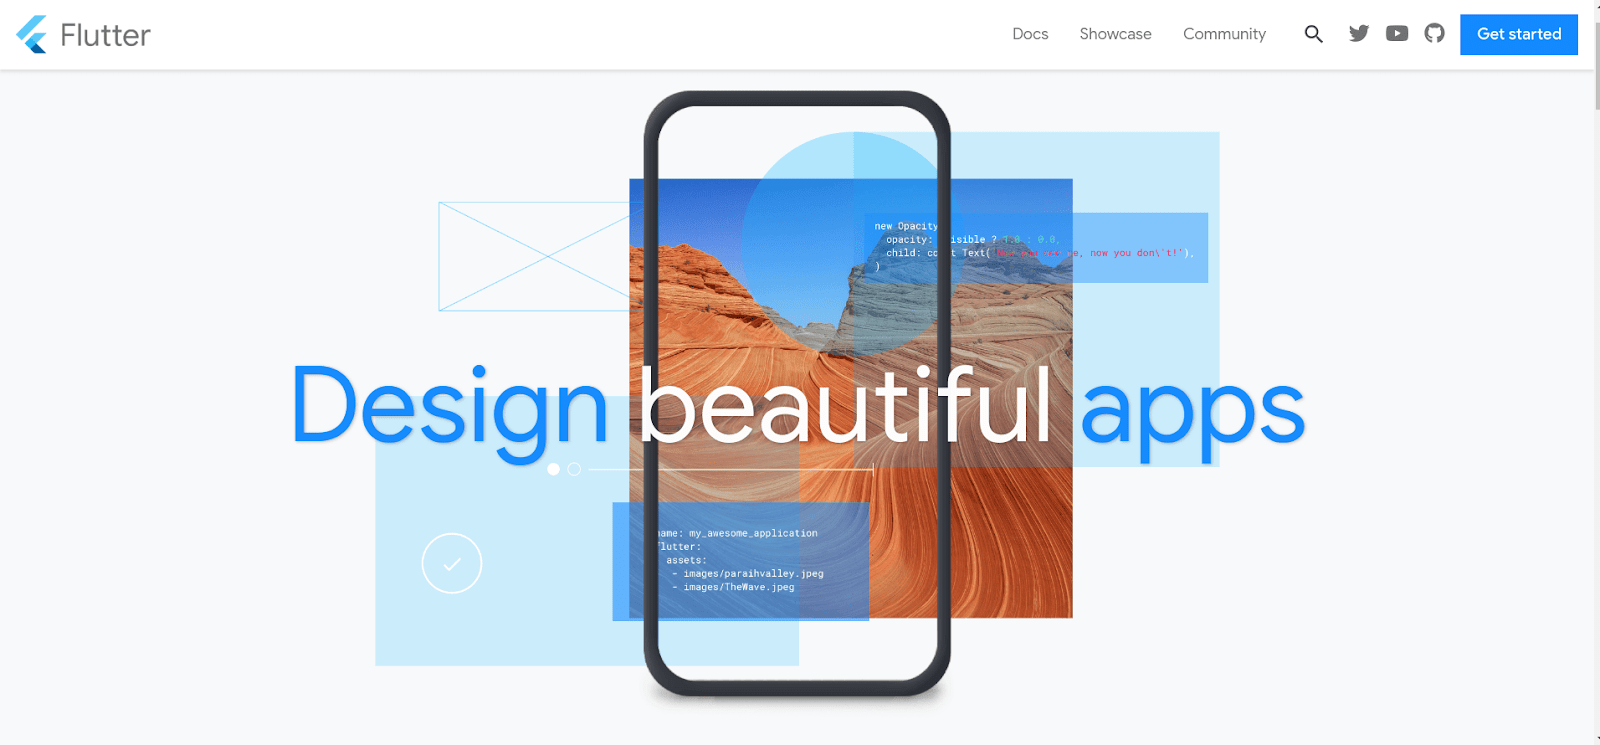 Flutter allows designing fast and attractive looking apps